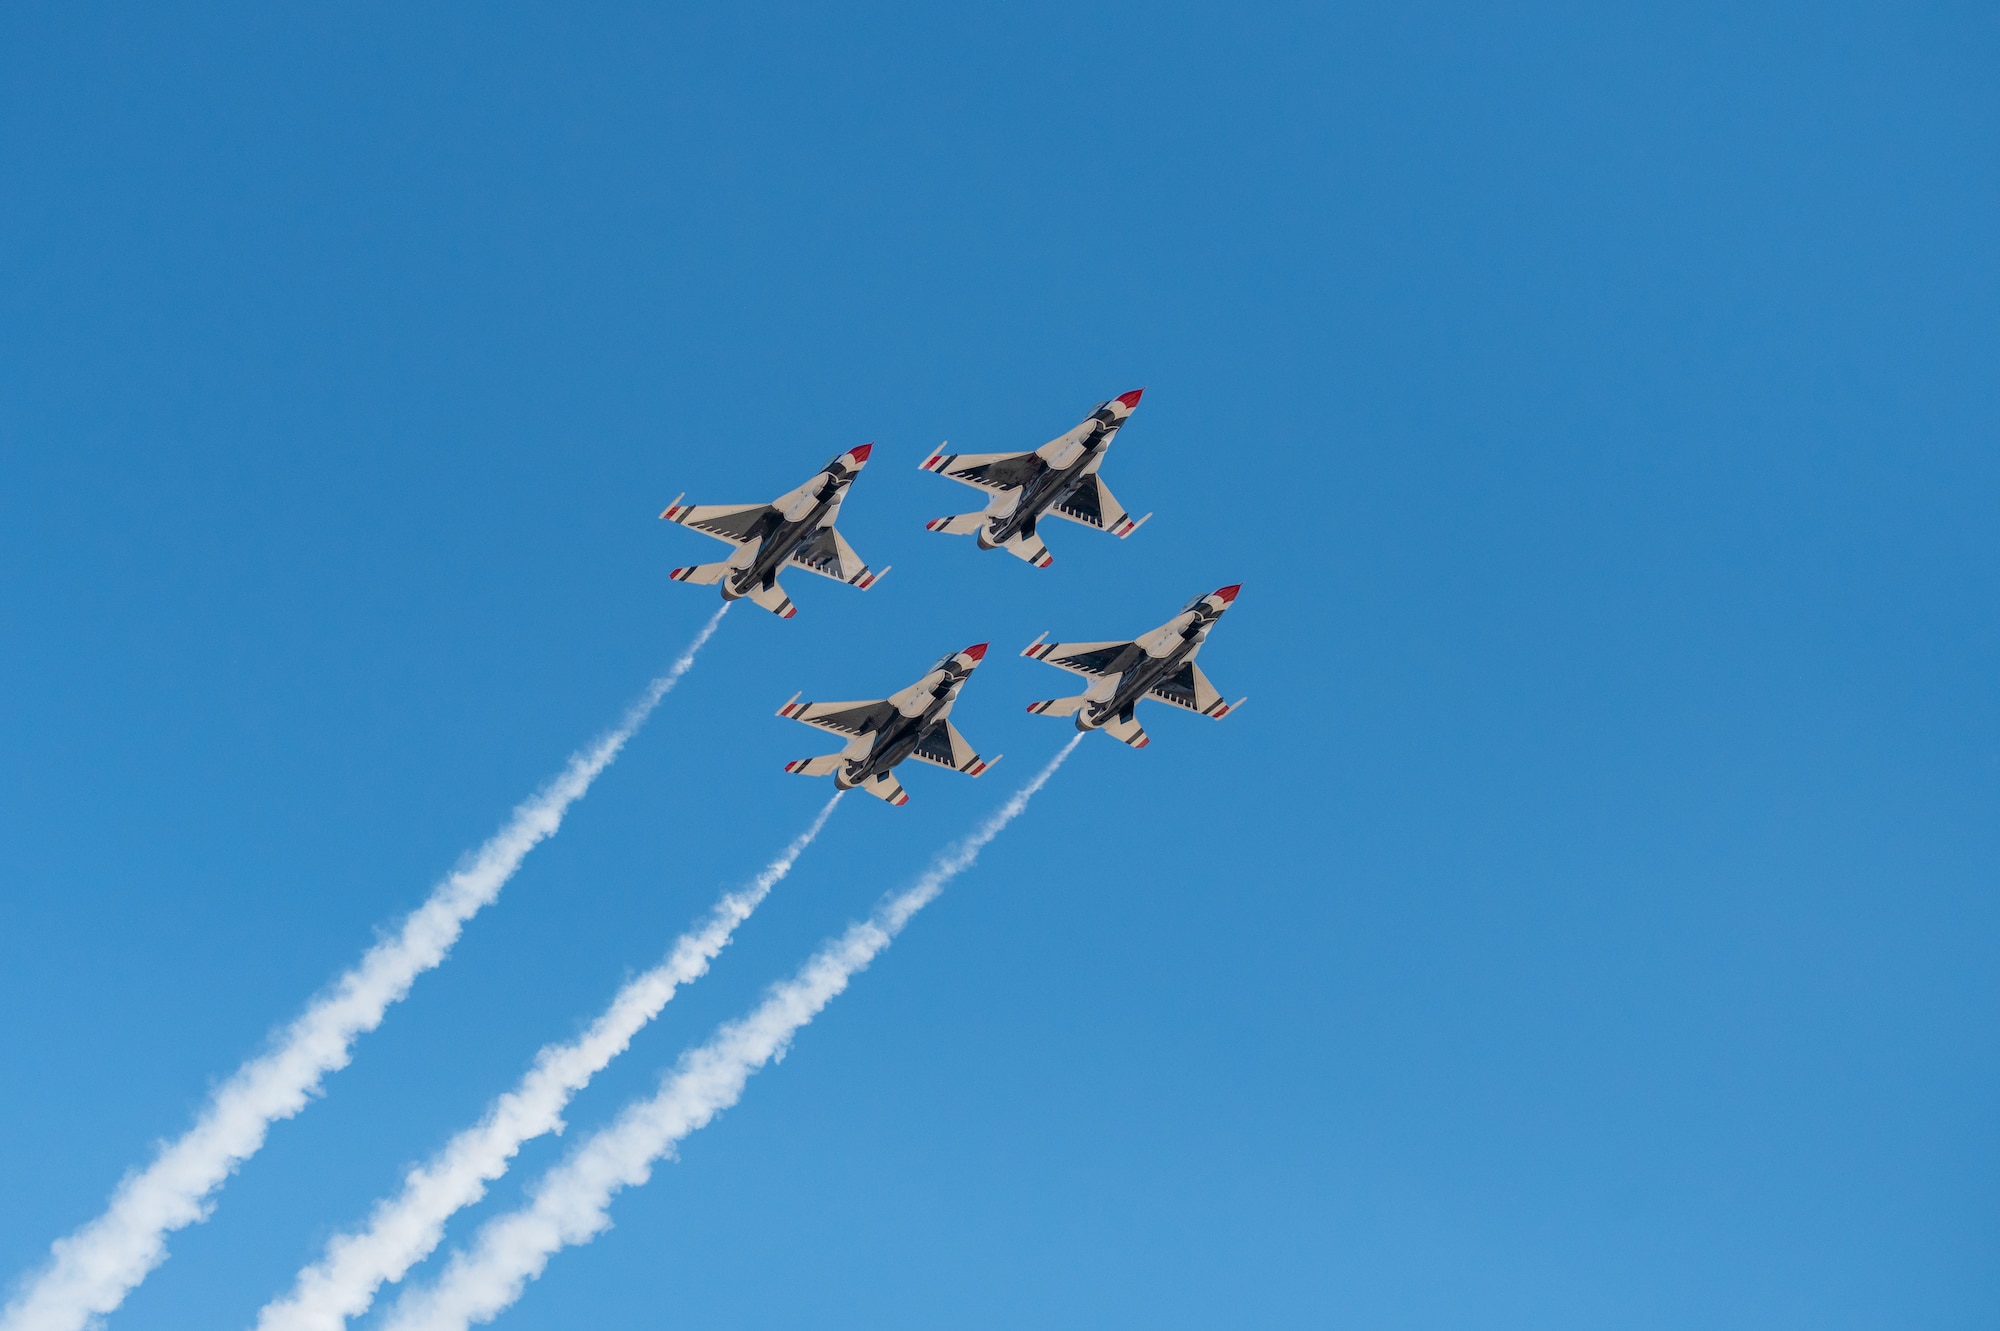 The United States Air Force Air Demonstration Squadron, known as the Thunderbirds, perform during the Frontiers in Flight Open House and Air Show at McConnell Air Force Base, Kansas, Sept. 24, 2022.